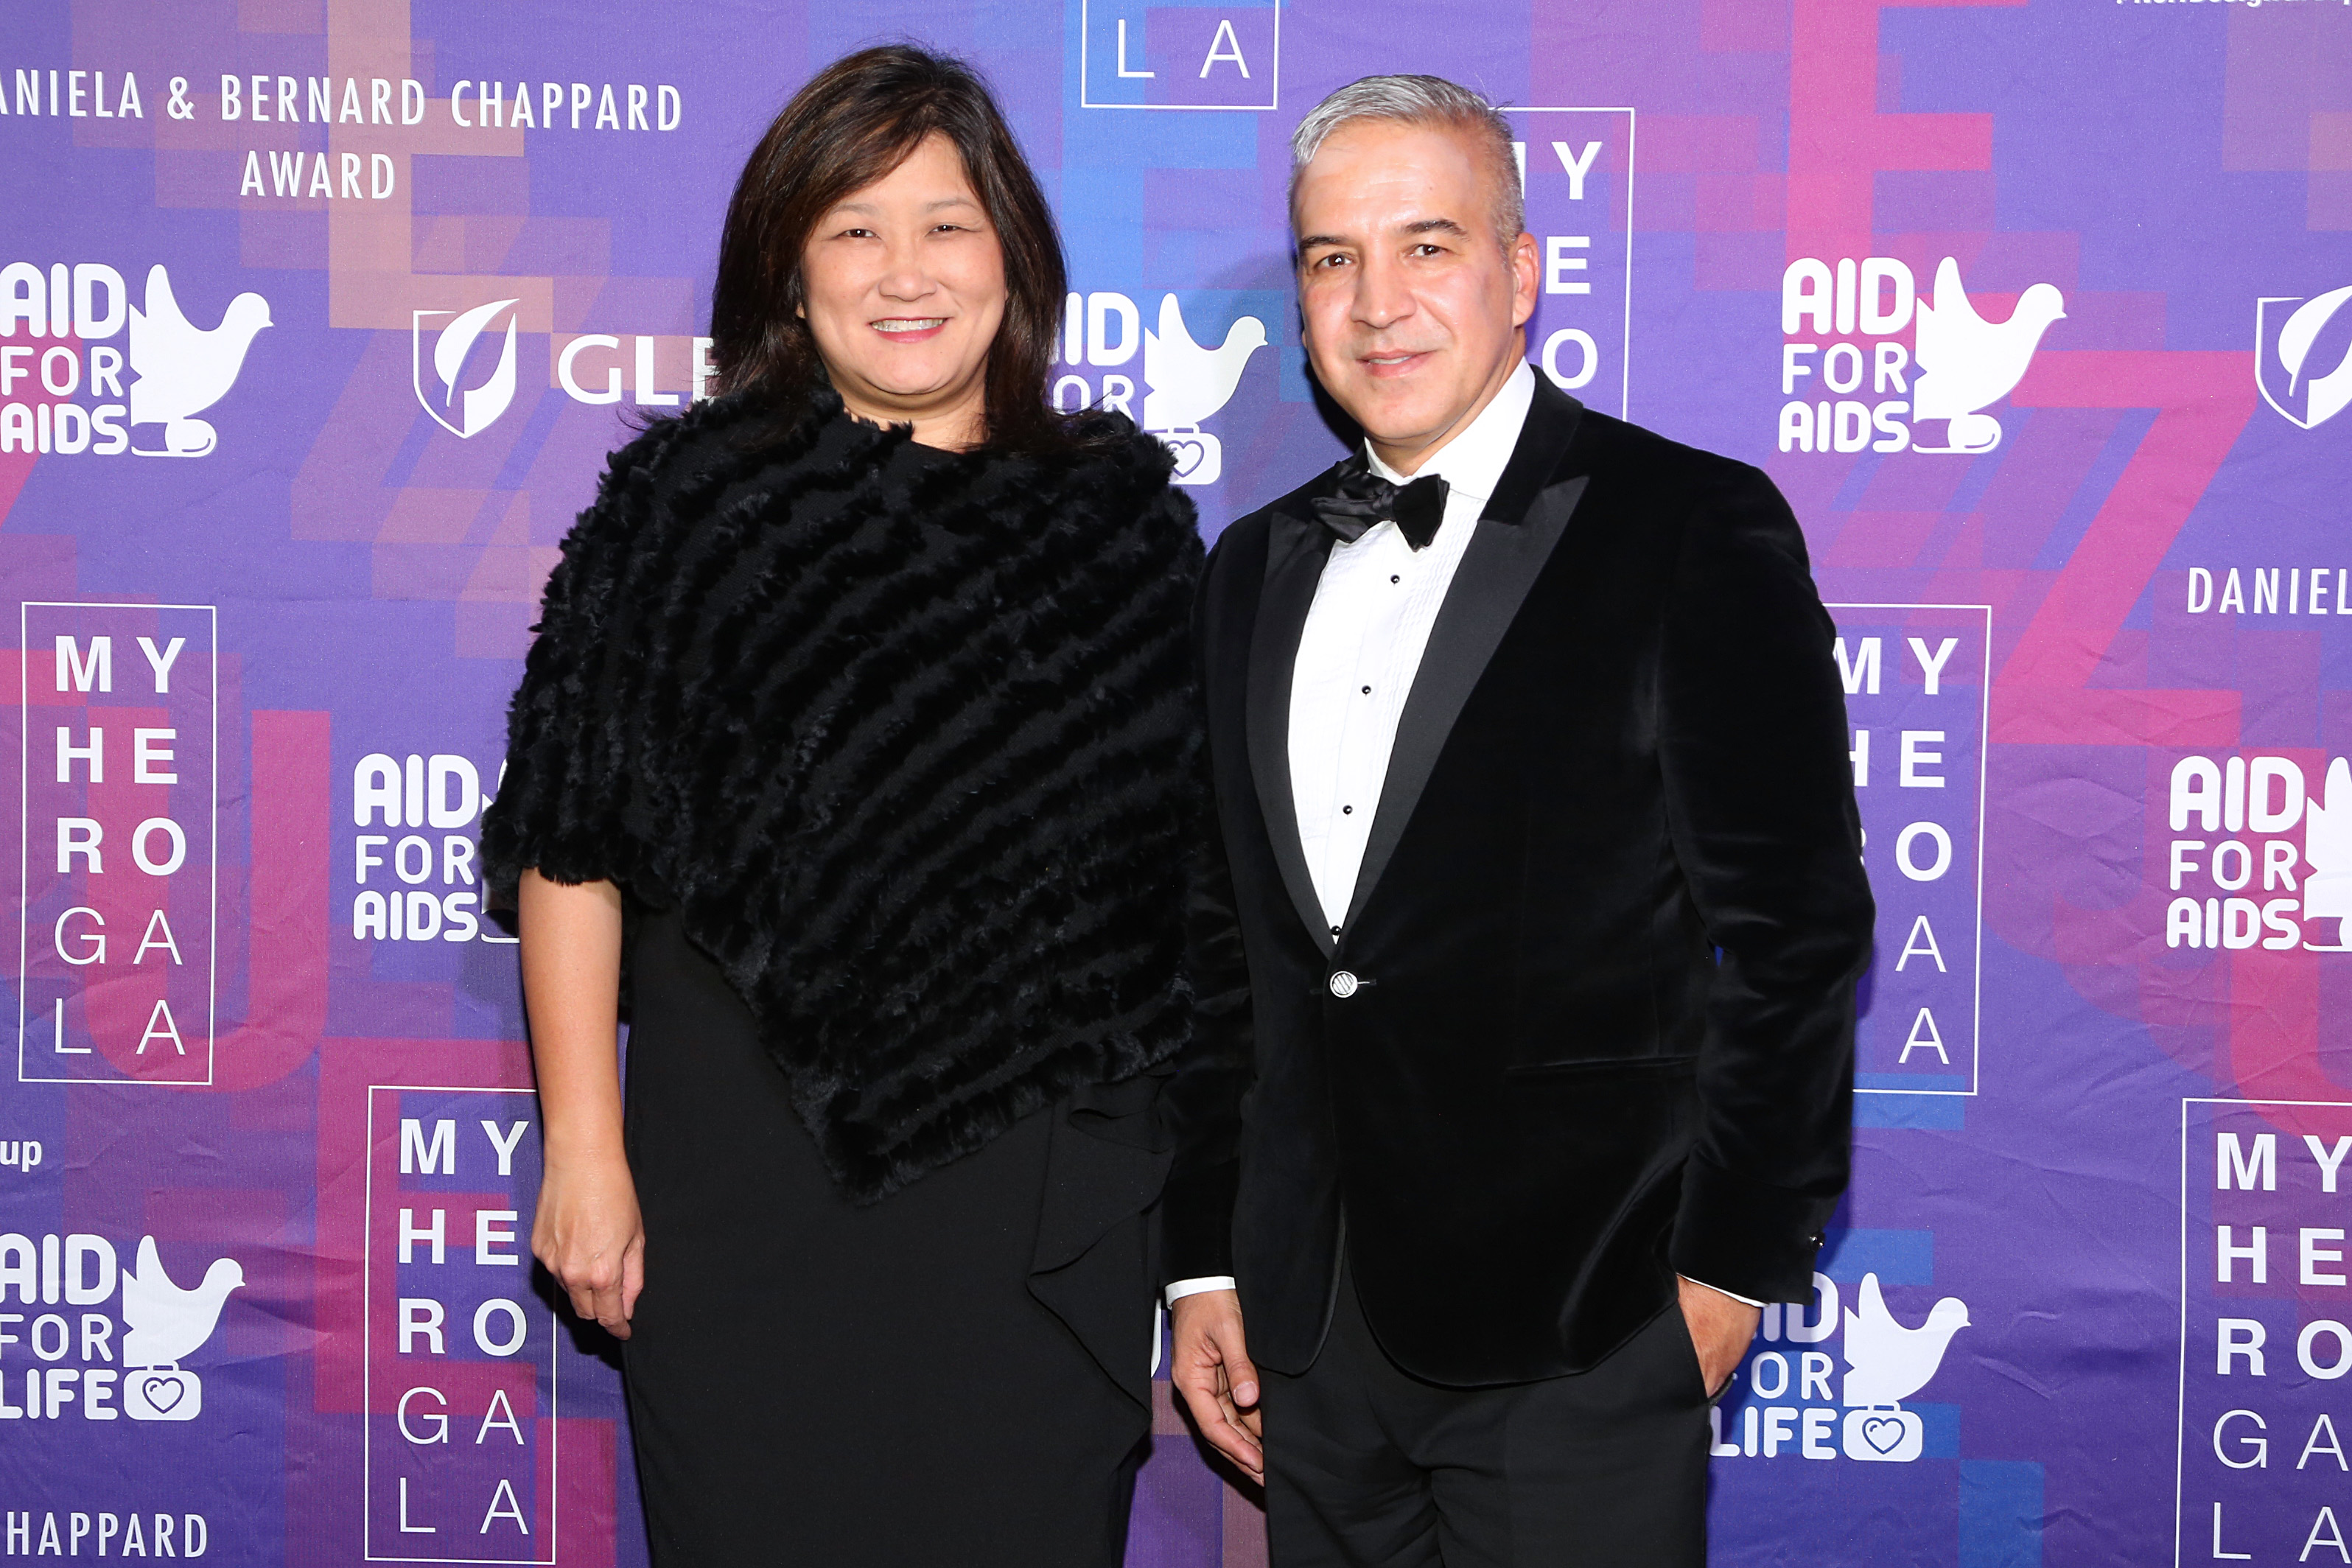 Betty Chiang, VP Public Health and Medical Affairs, Gilead (My Hero award recipient) and Jesus Aguais, Executive Director & Founder, AID FOR AIDS